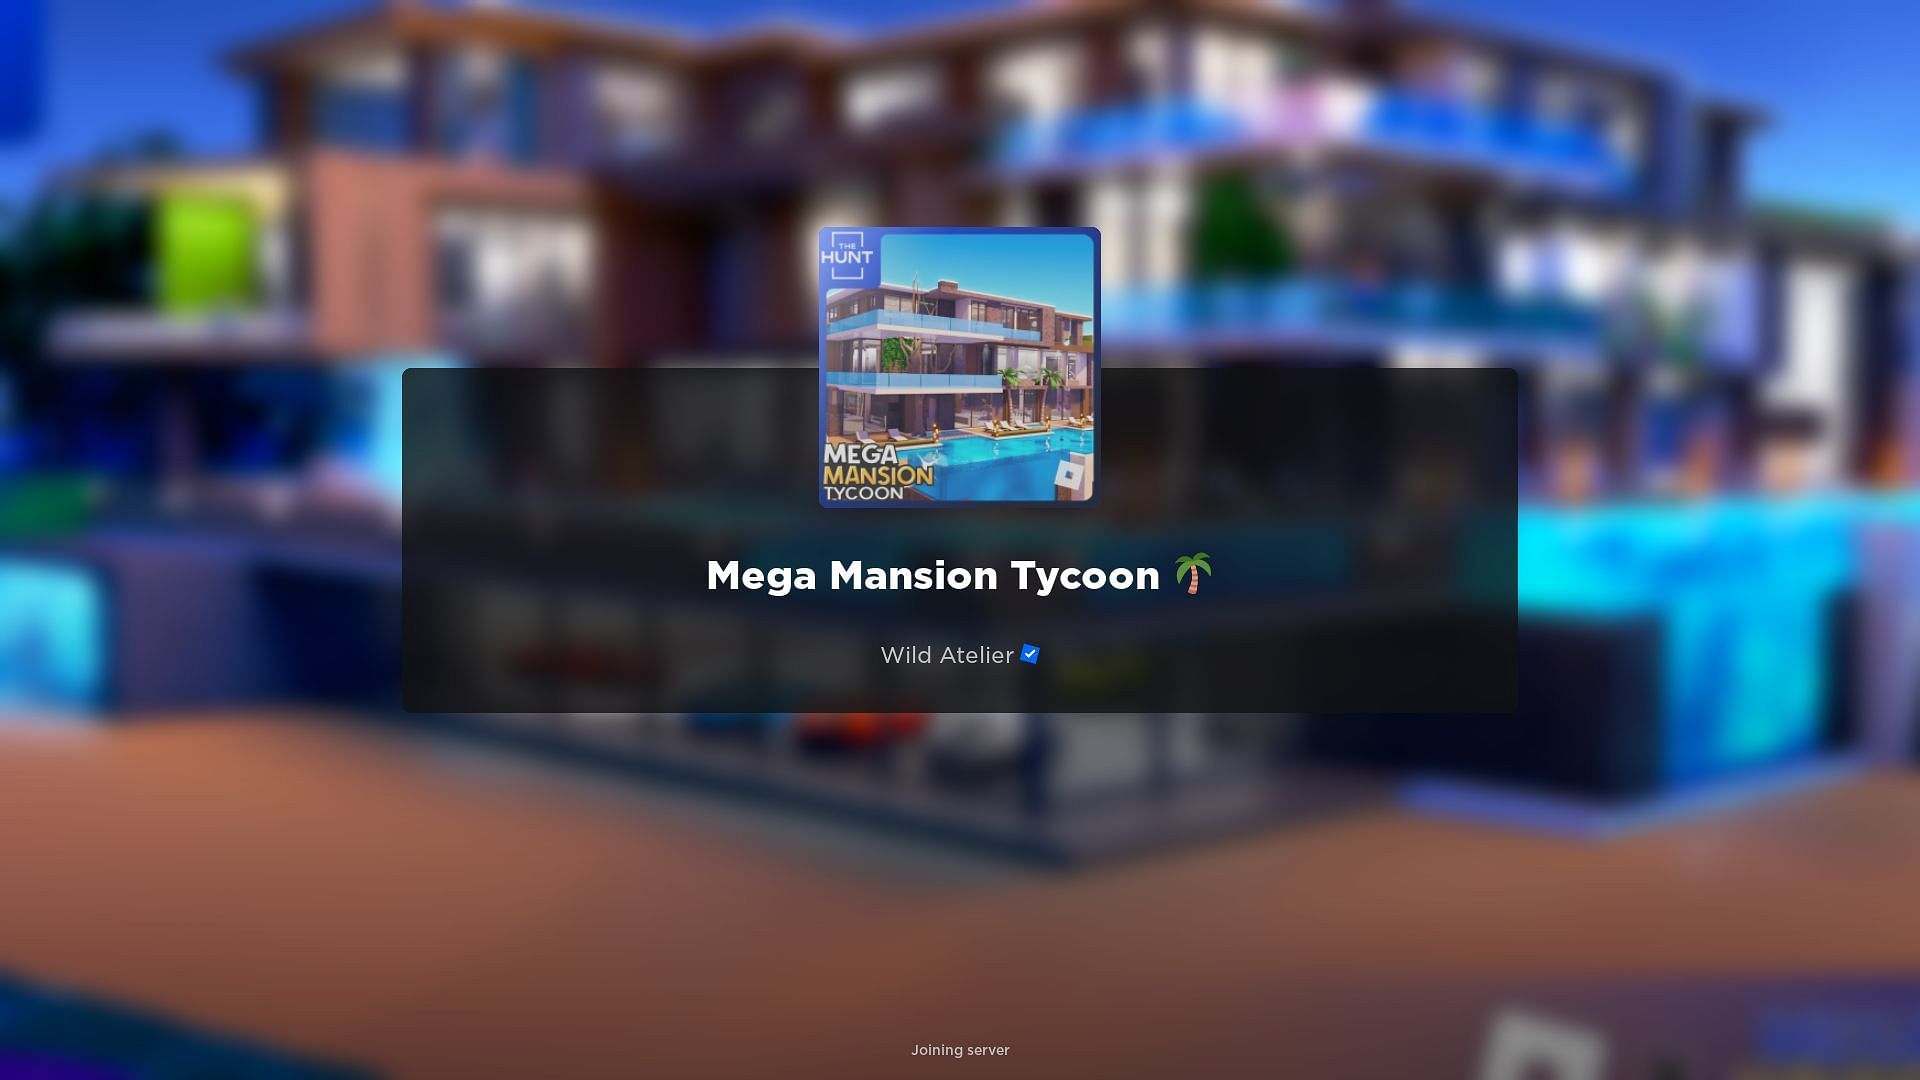 The Hunt in Mega Mansion Tycoon